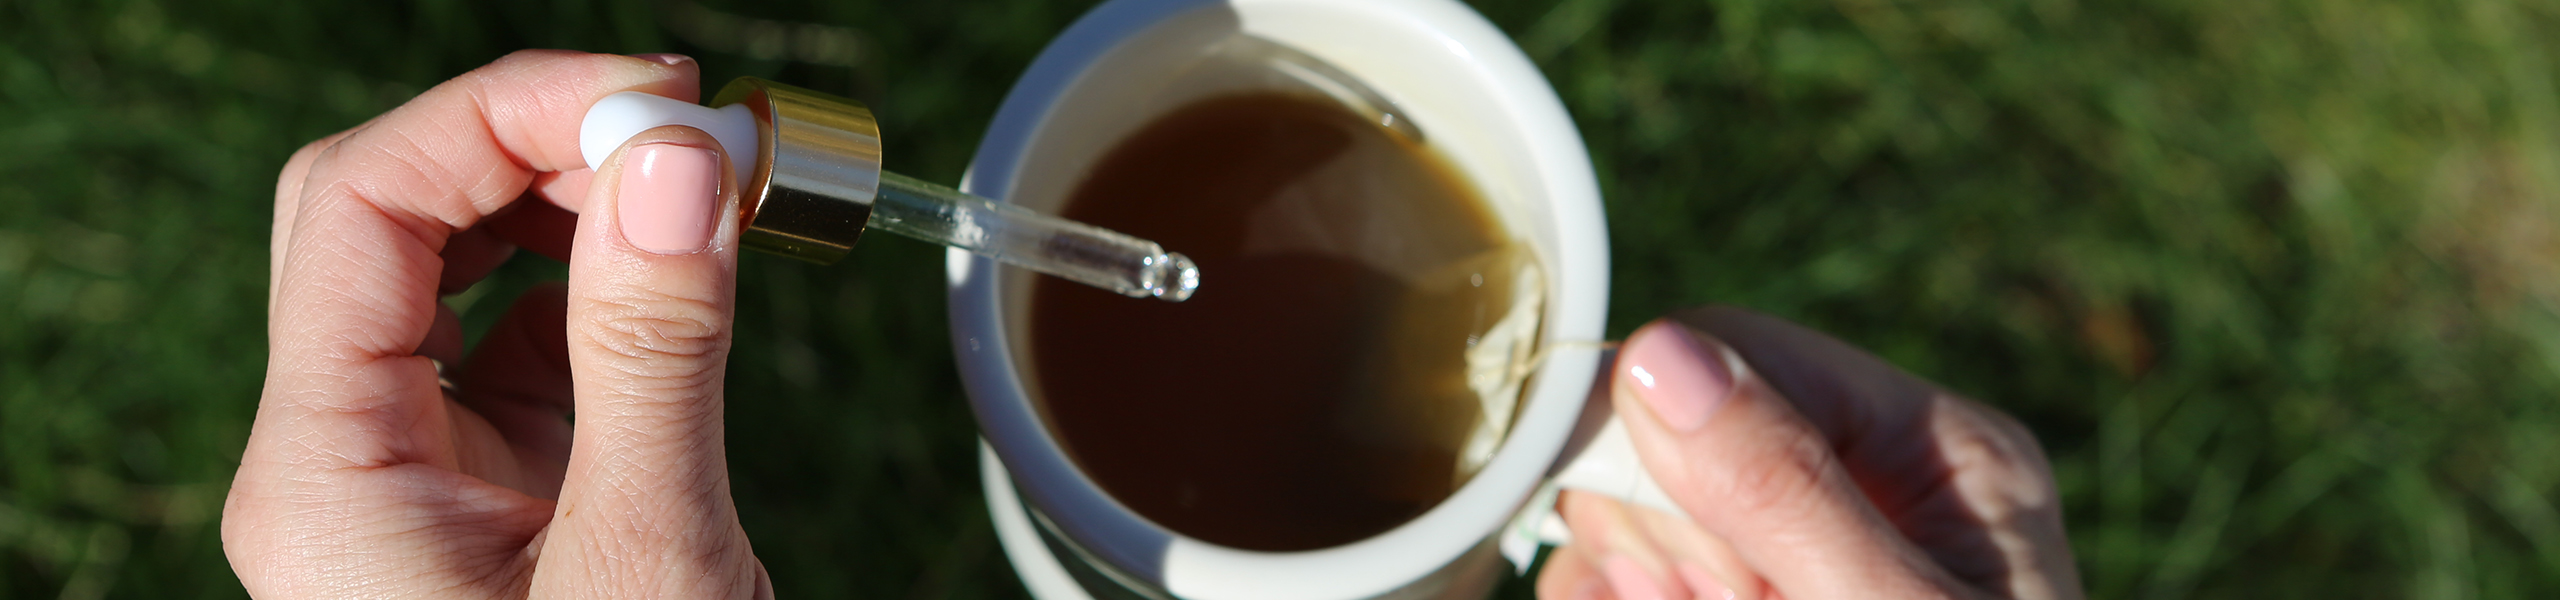 A person adds CBD oil to a cup of tea.